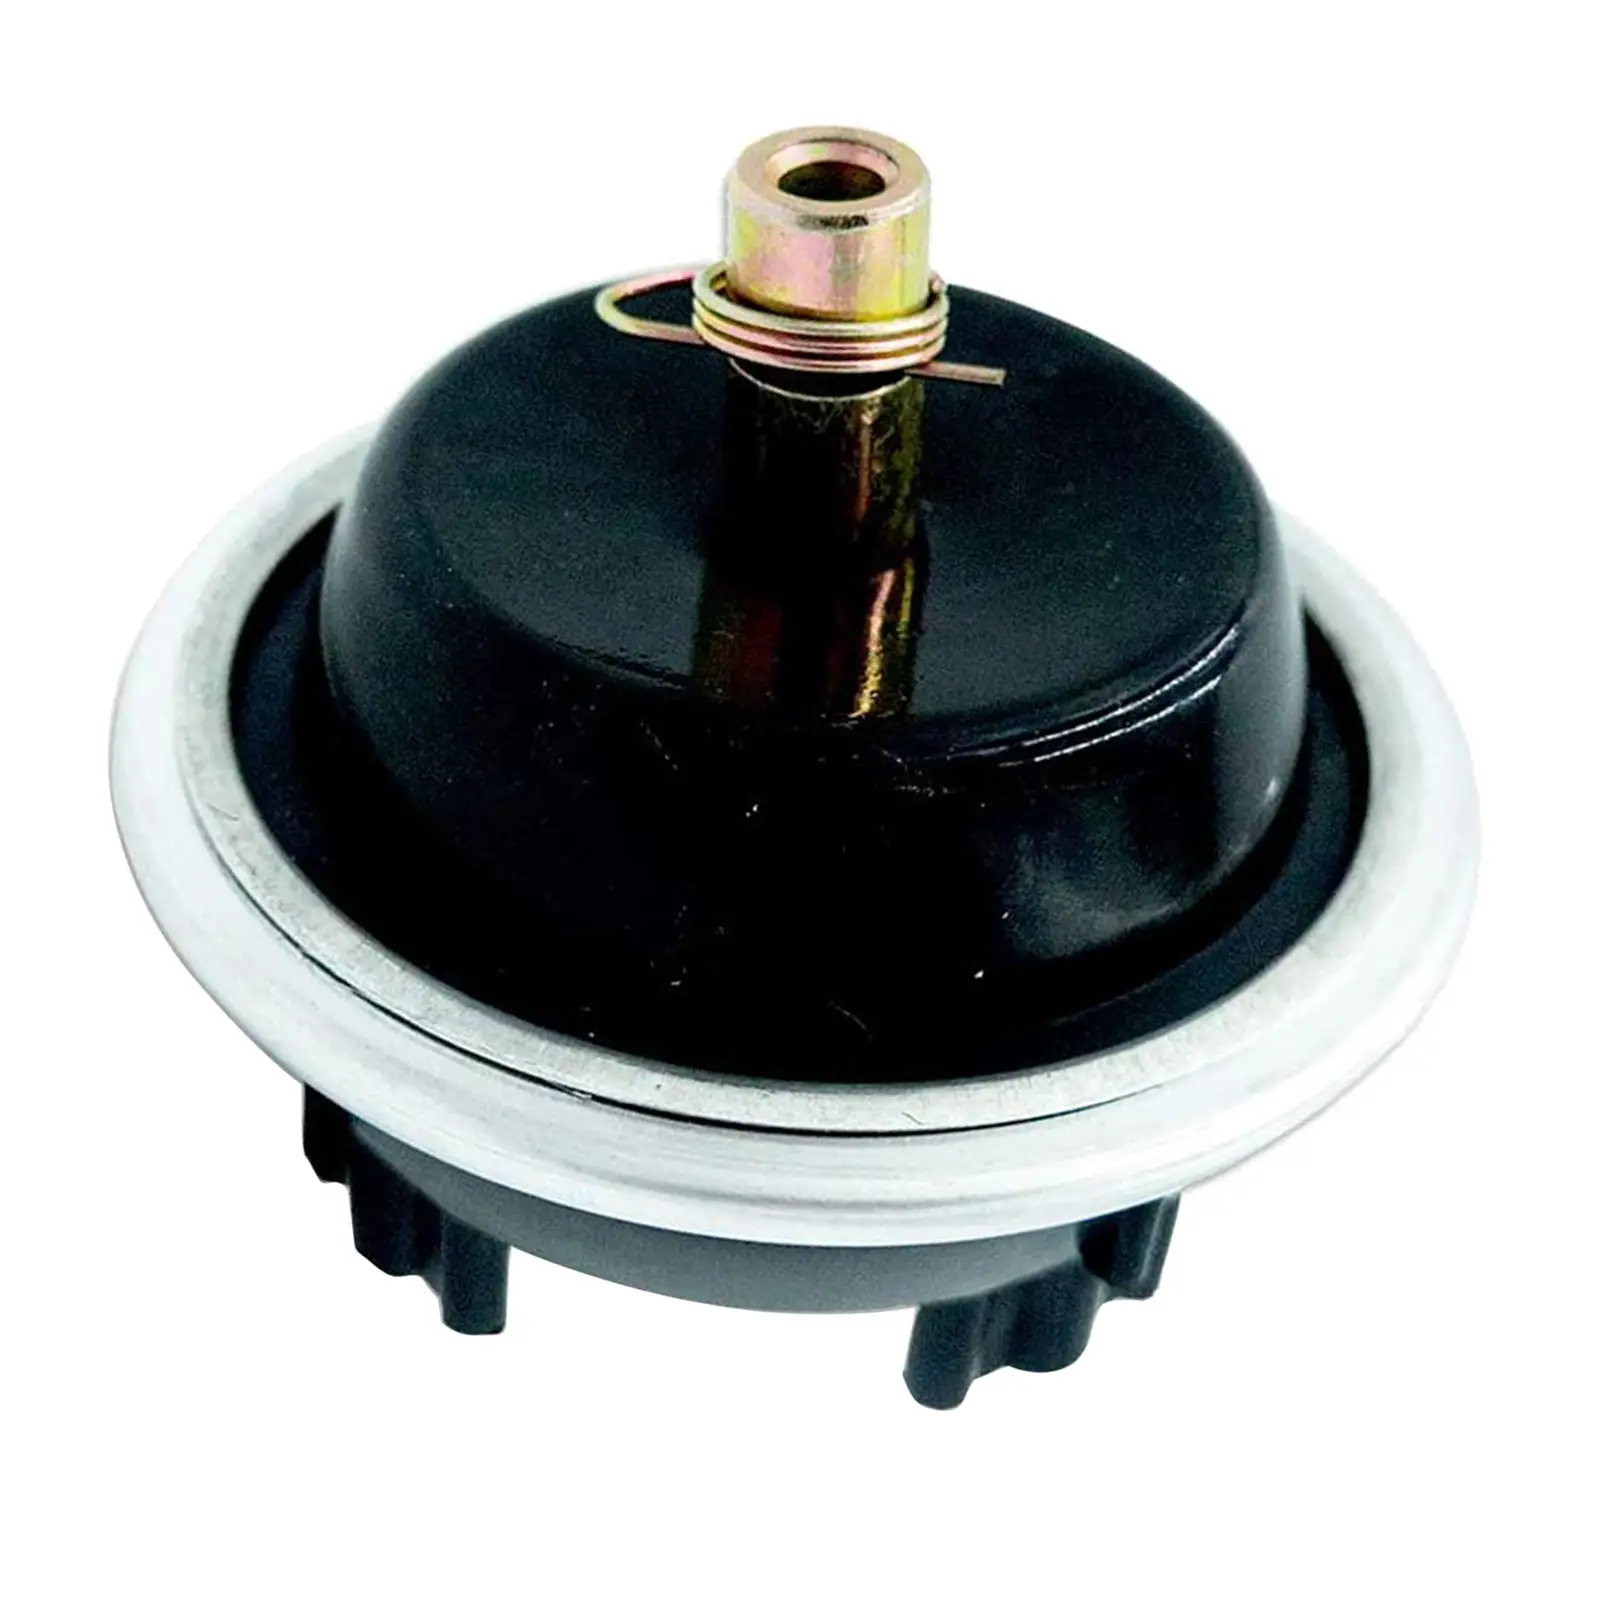 4WD Front Differential Vacuum Actuator 25031740 for for S10 Easy to Install Professional Car Parts Direct Replaces